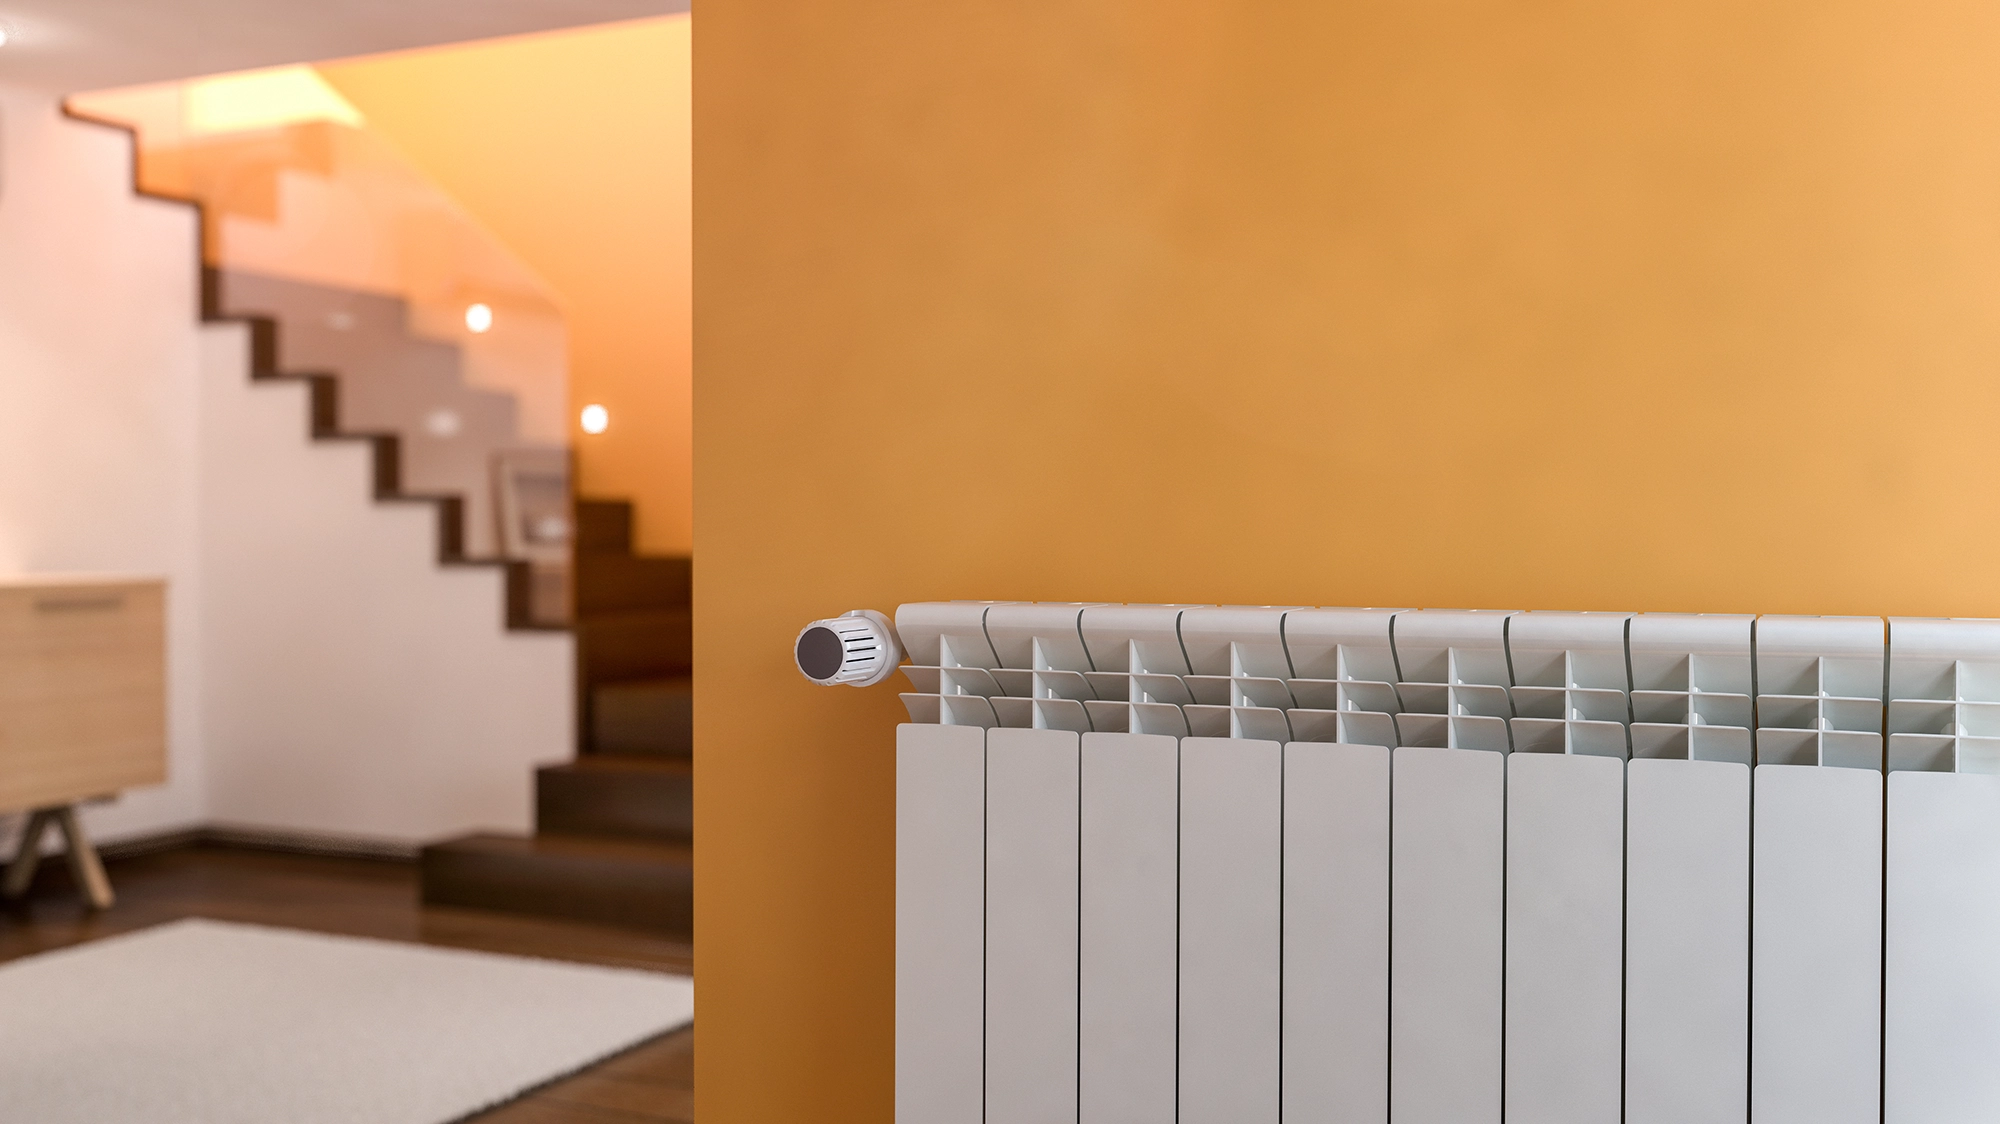 Image of a white radiator with thermostatic valves located in an amber-colored room with a luxurious staircase, highlighting the elegant interior design.